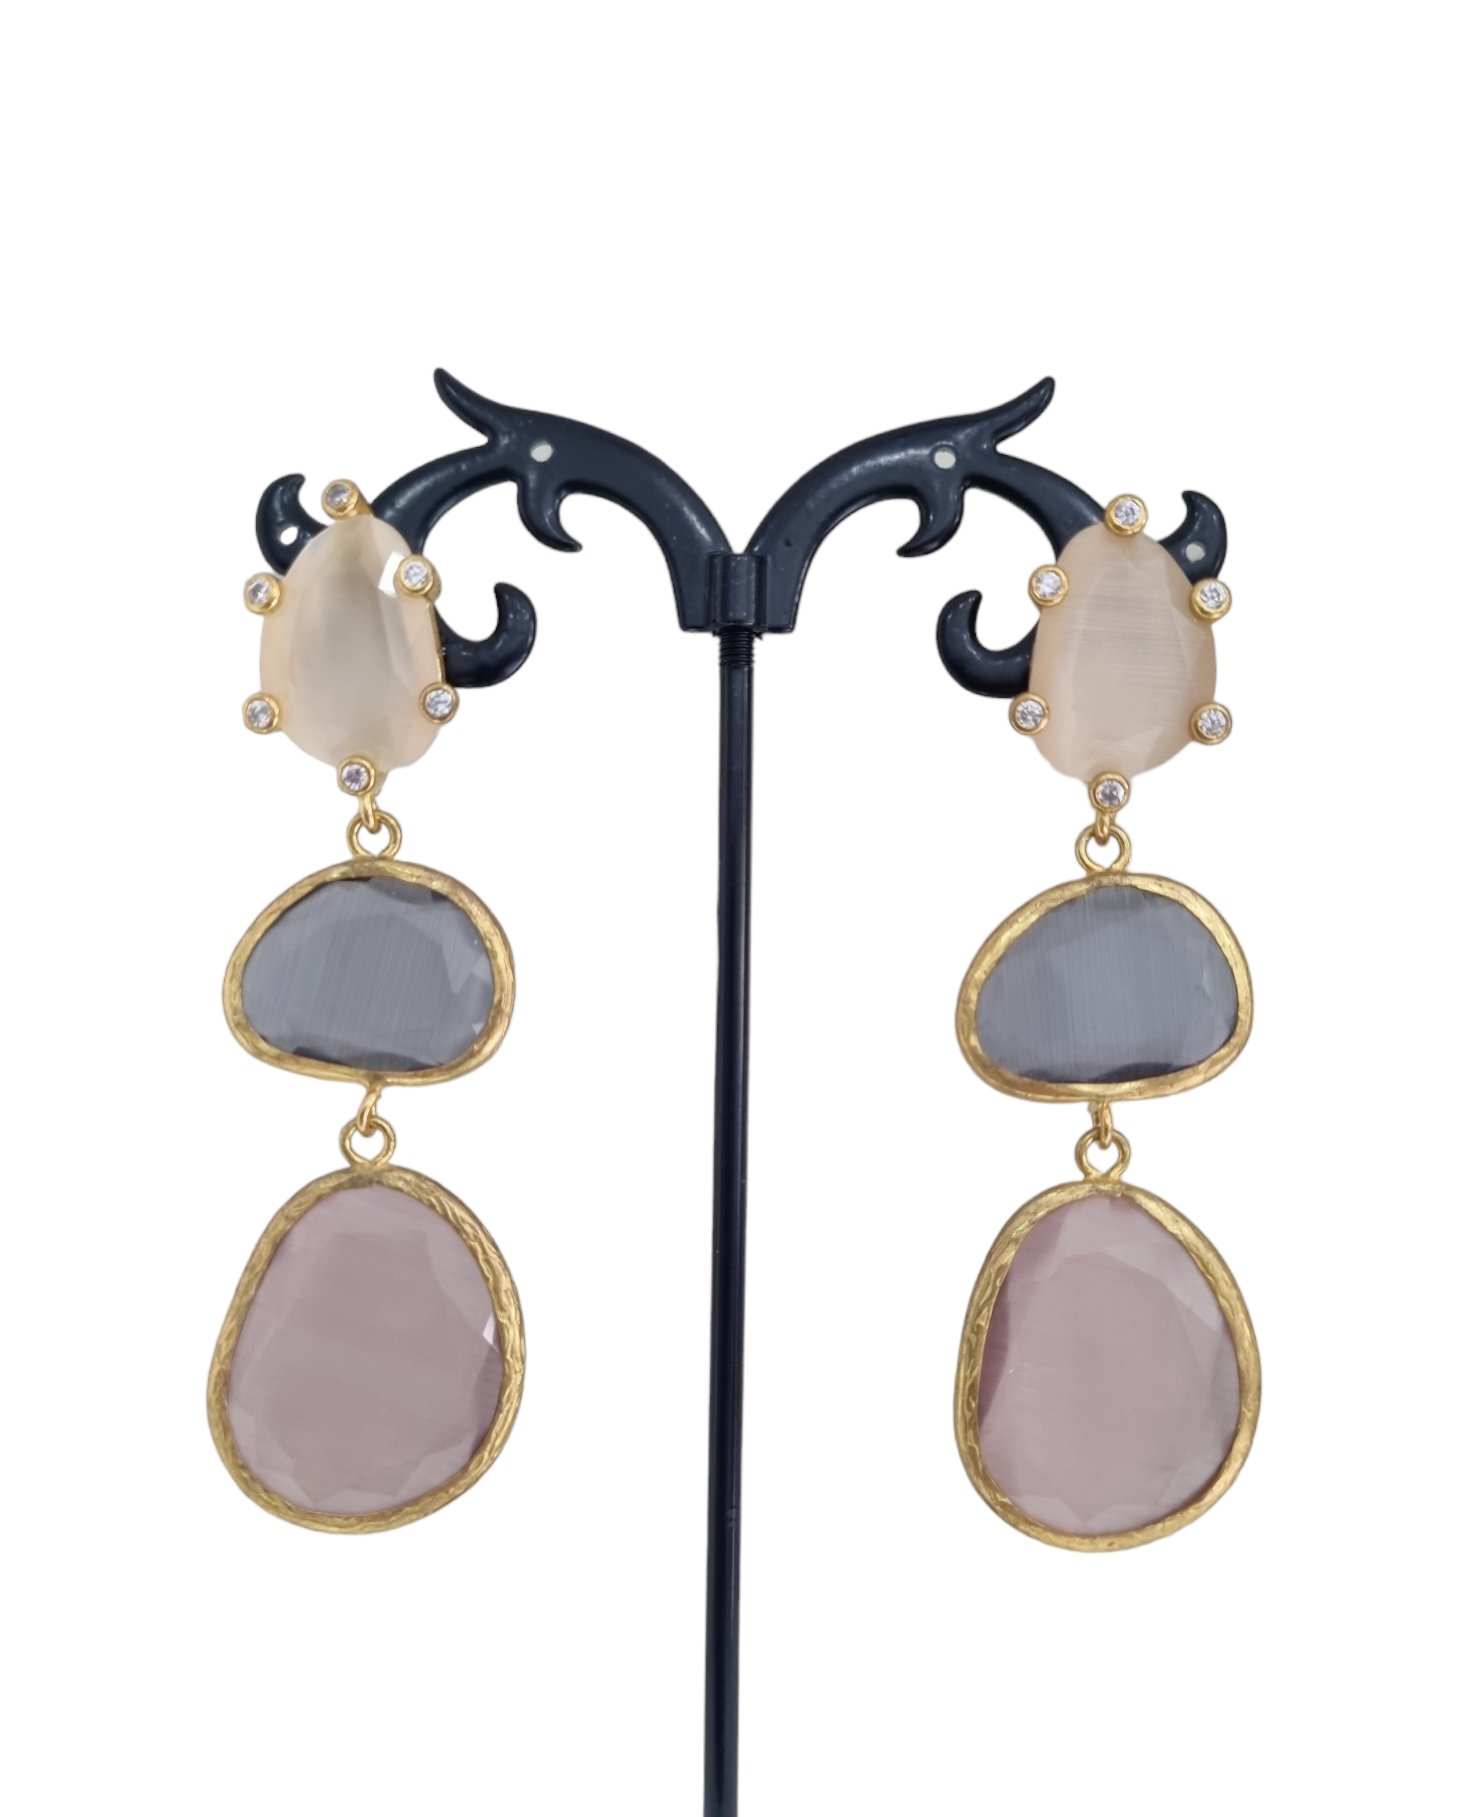 Cat's eye earrings mounted on brass and pin surrounded by zircons. Length 7cm Weight 10g